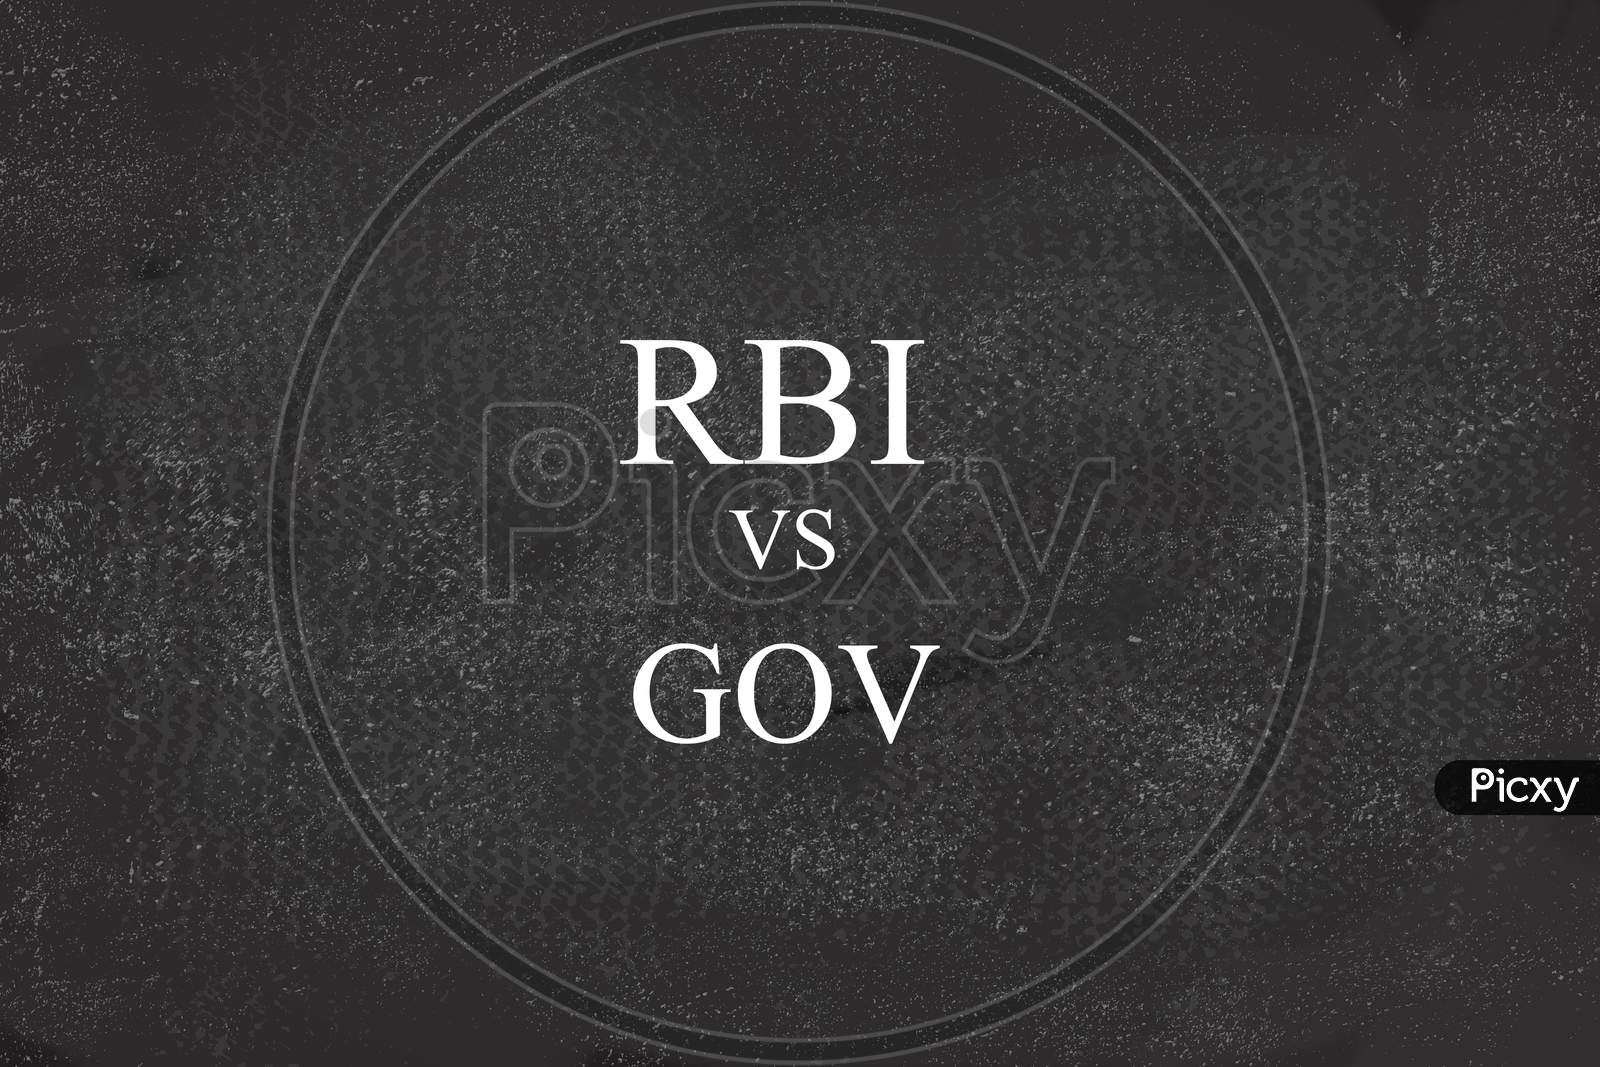 There Is Recent Rift Between Rbi And Government Of India Concept On Black Board.